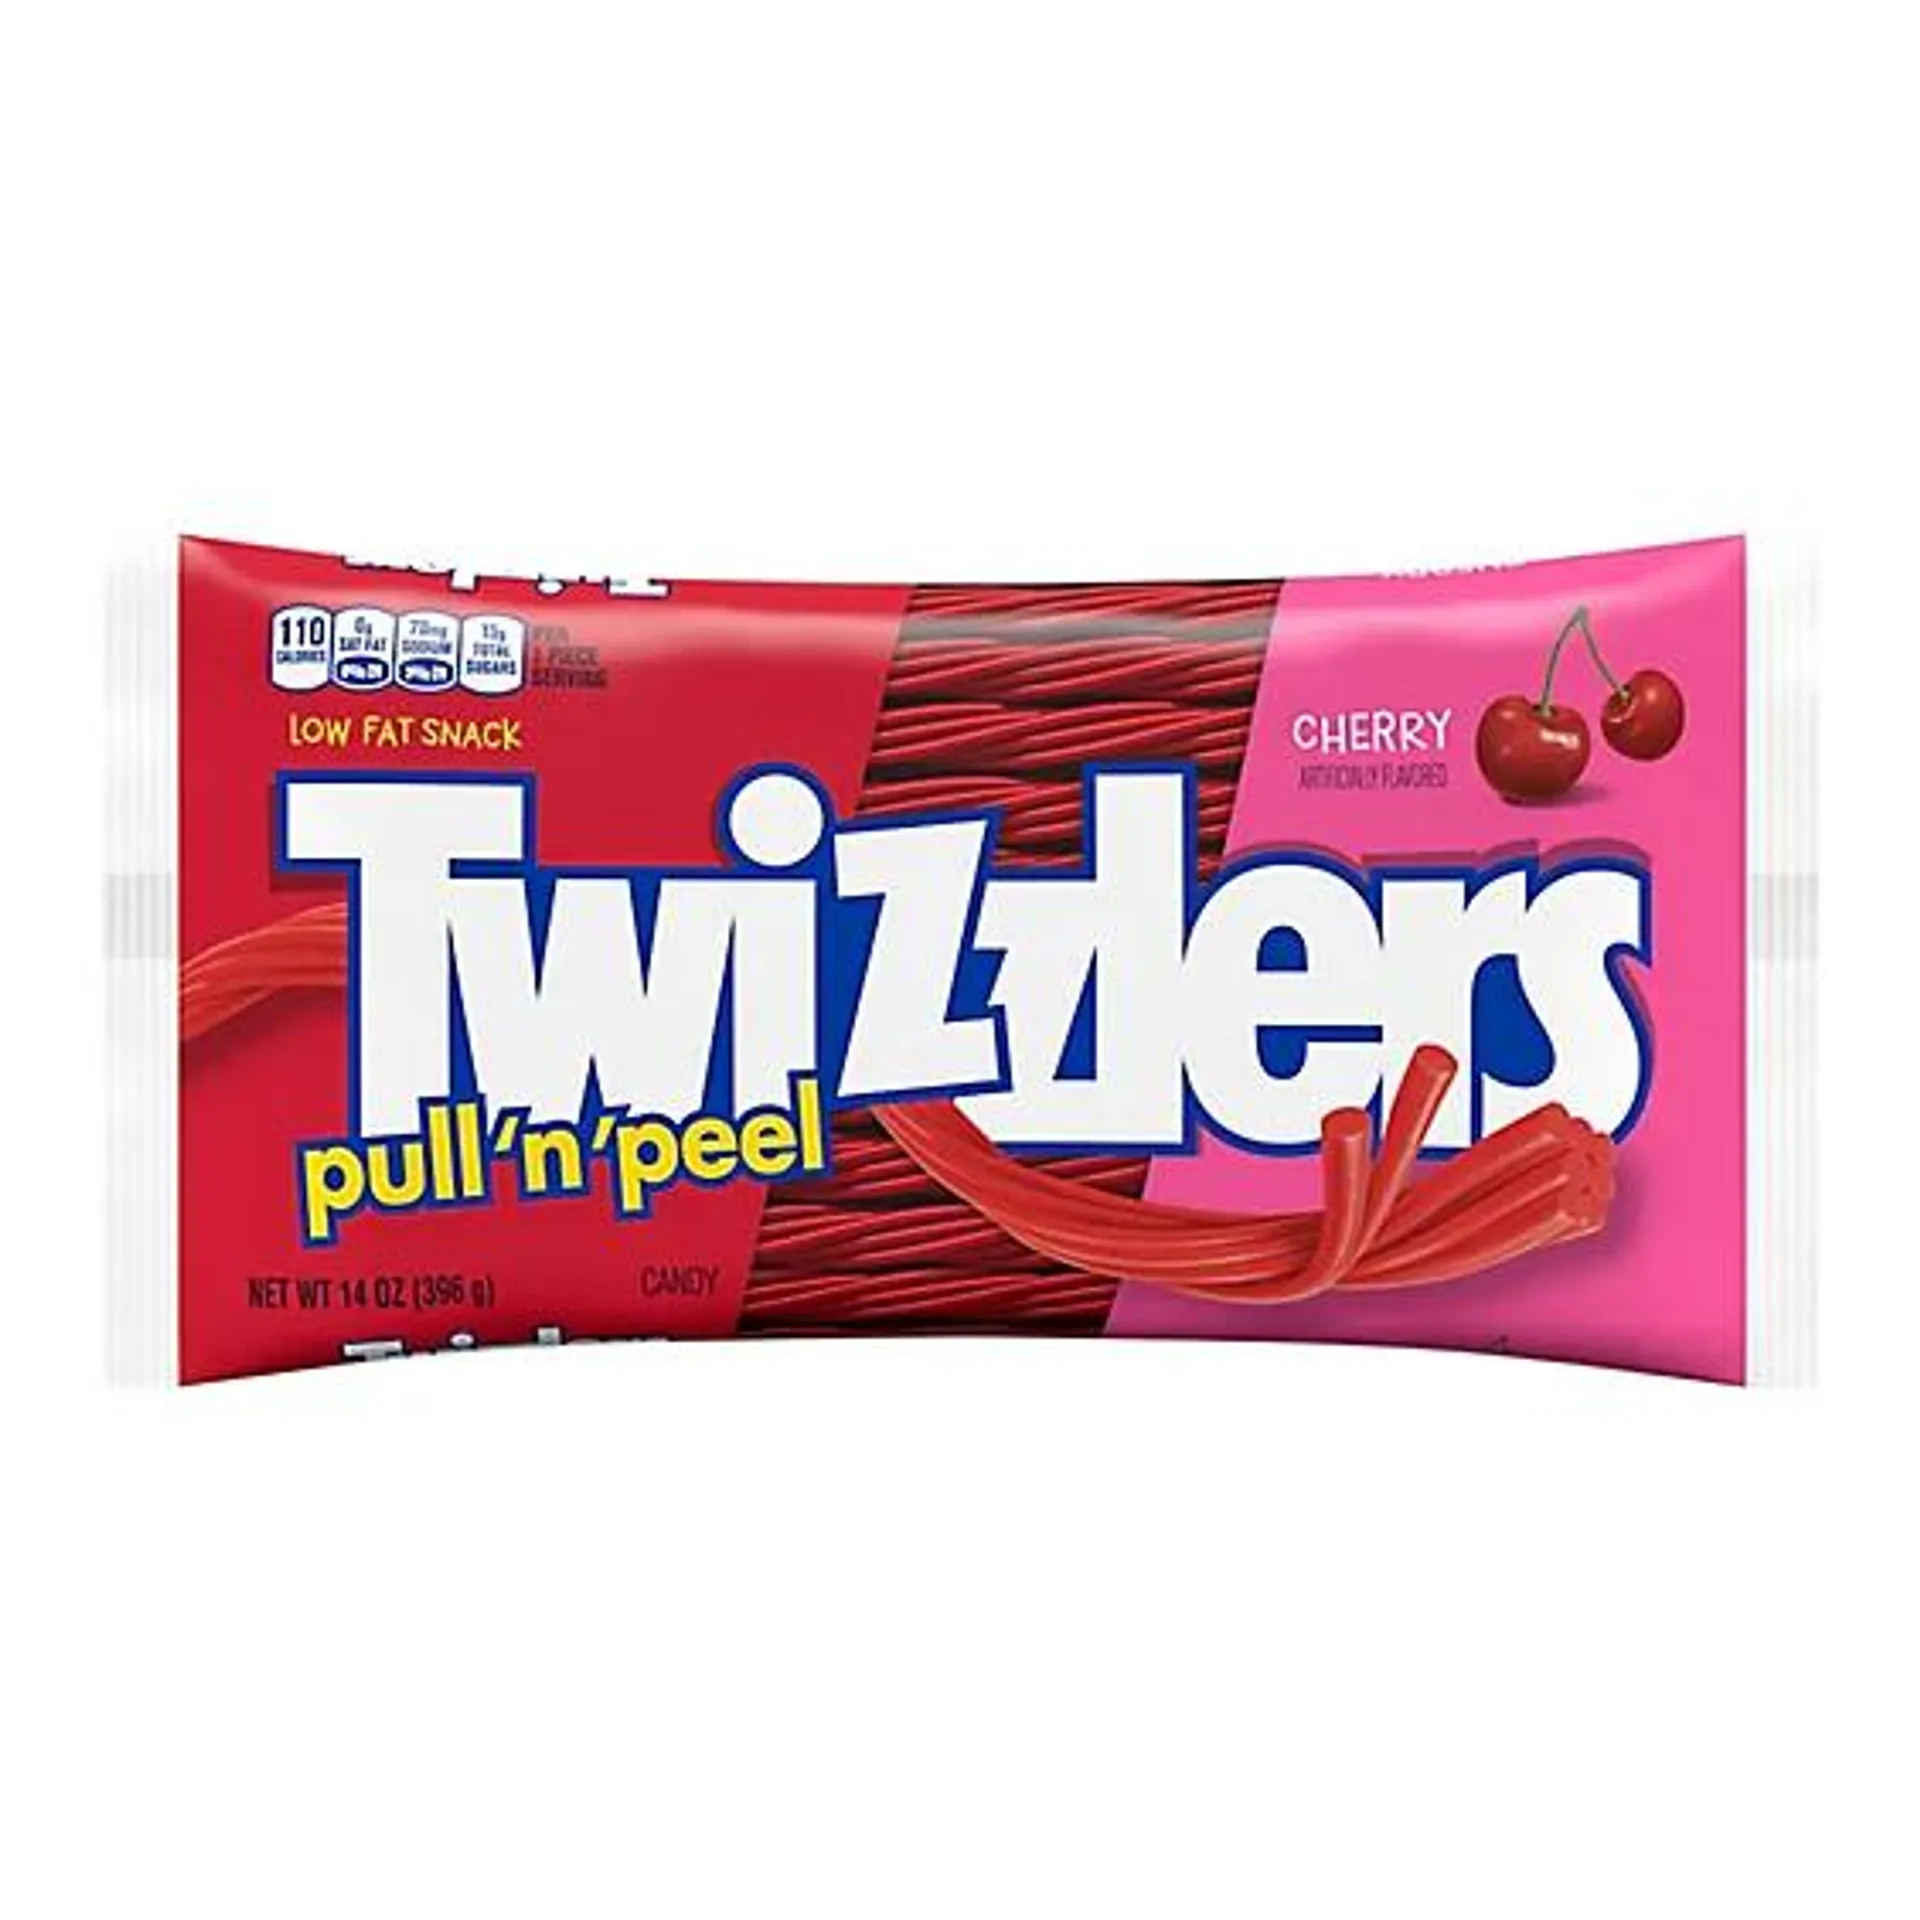 TWIZZLERS PULL 'N' PEEL Cherry Flavored Chewy, Low Fat Candy Bag, 14 oz